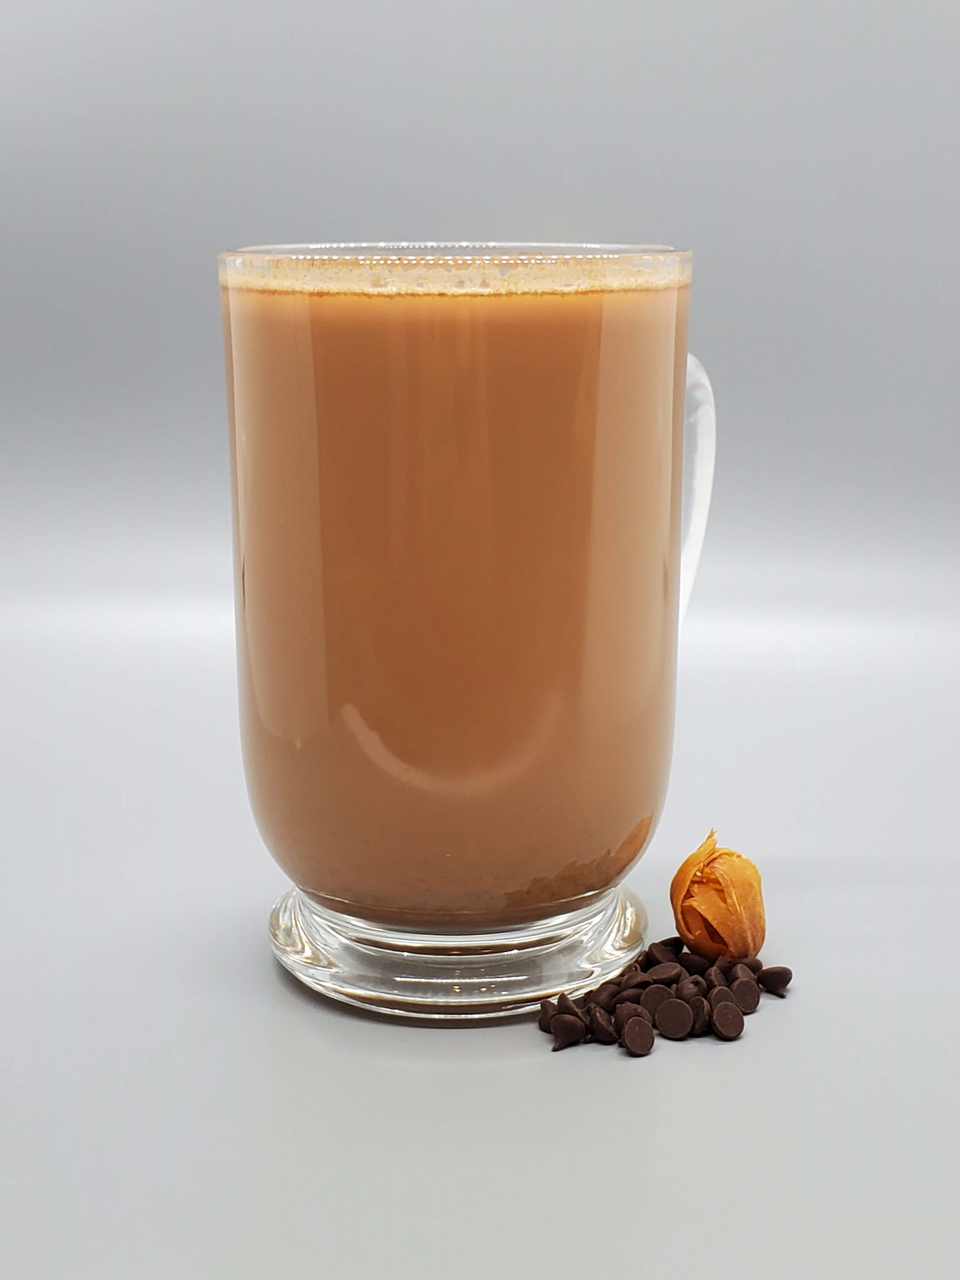 https://cdn11.bigcommerce.com/s-aqhkheg20v/images/stencil/1280x1280/products/4/166/Traditional_Brew_Chocolate_Chai_Tea_Latte__47087.1591138227.png?c=2